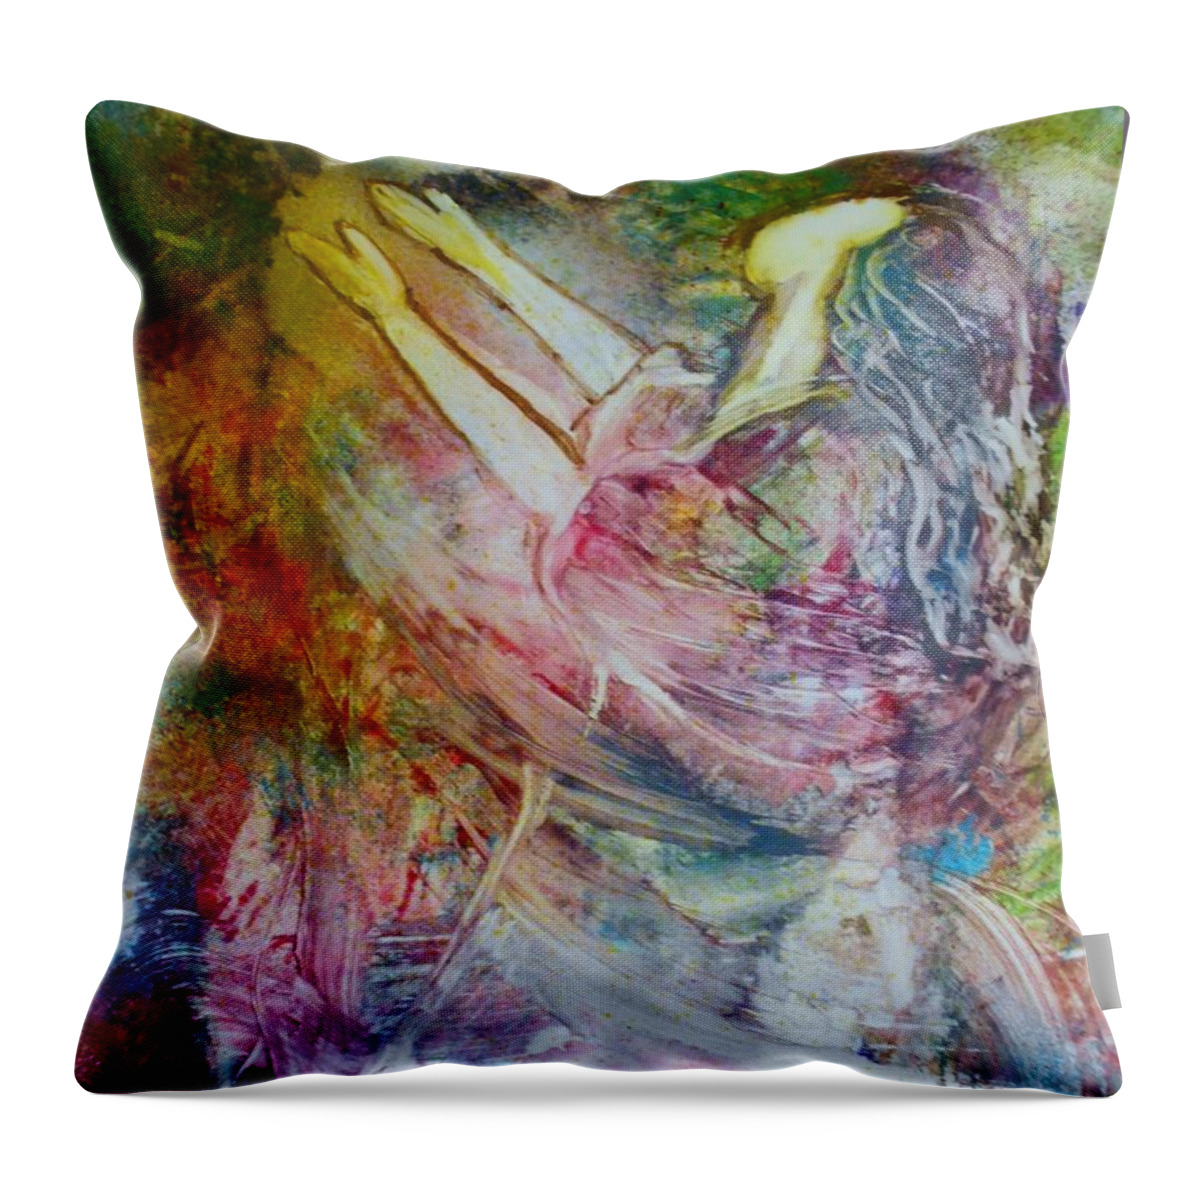 Faceless Throw Pillow featuring the painting Oh How He Loves Us by Deborah Nell